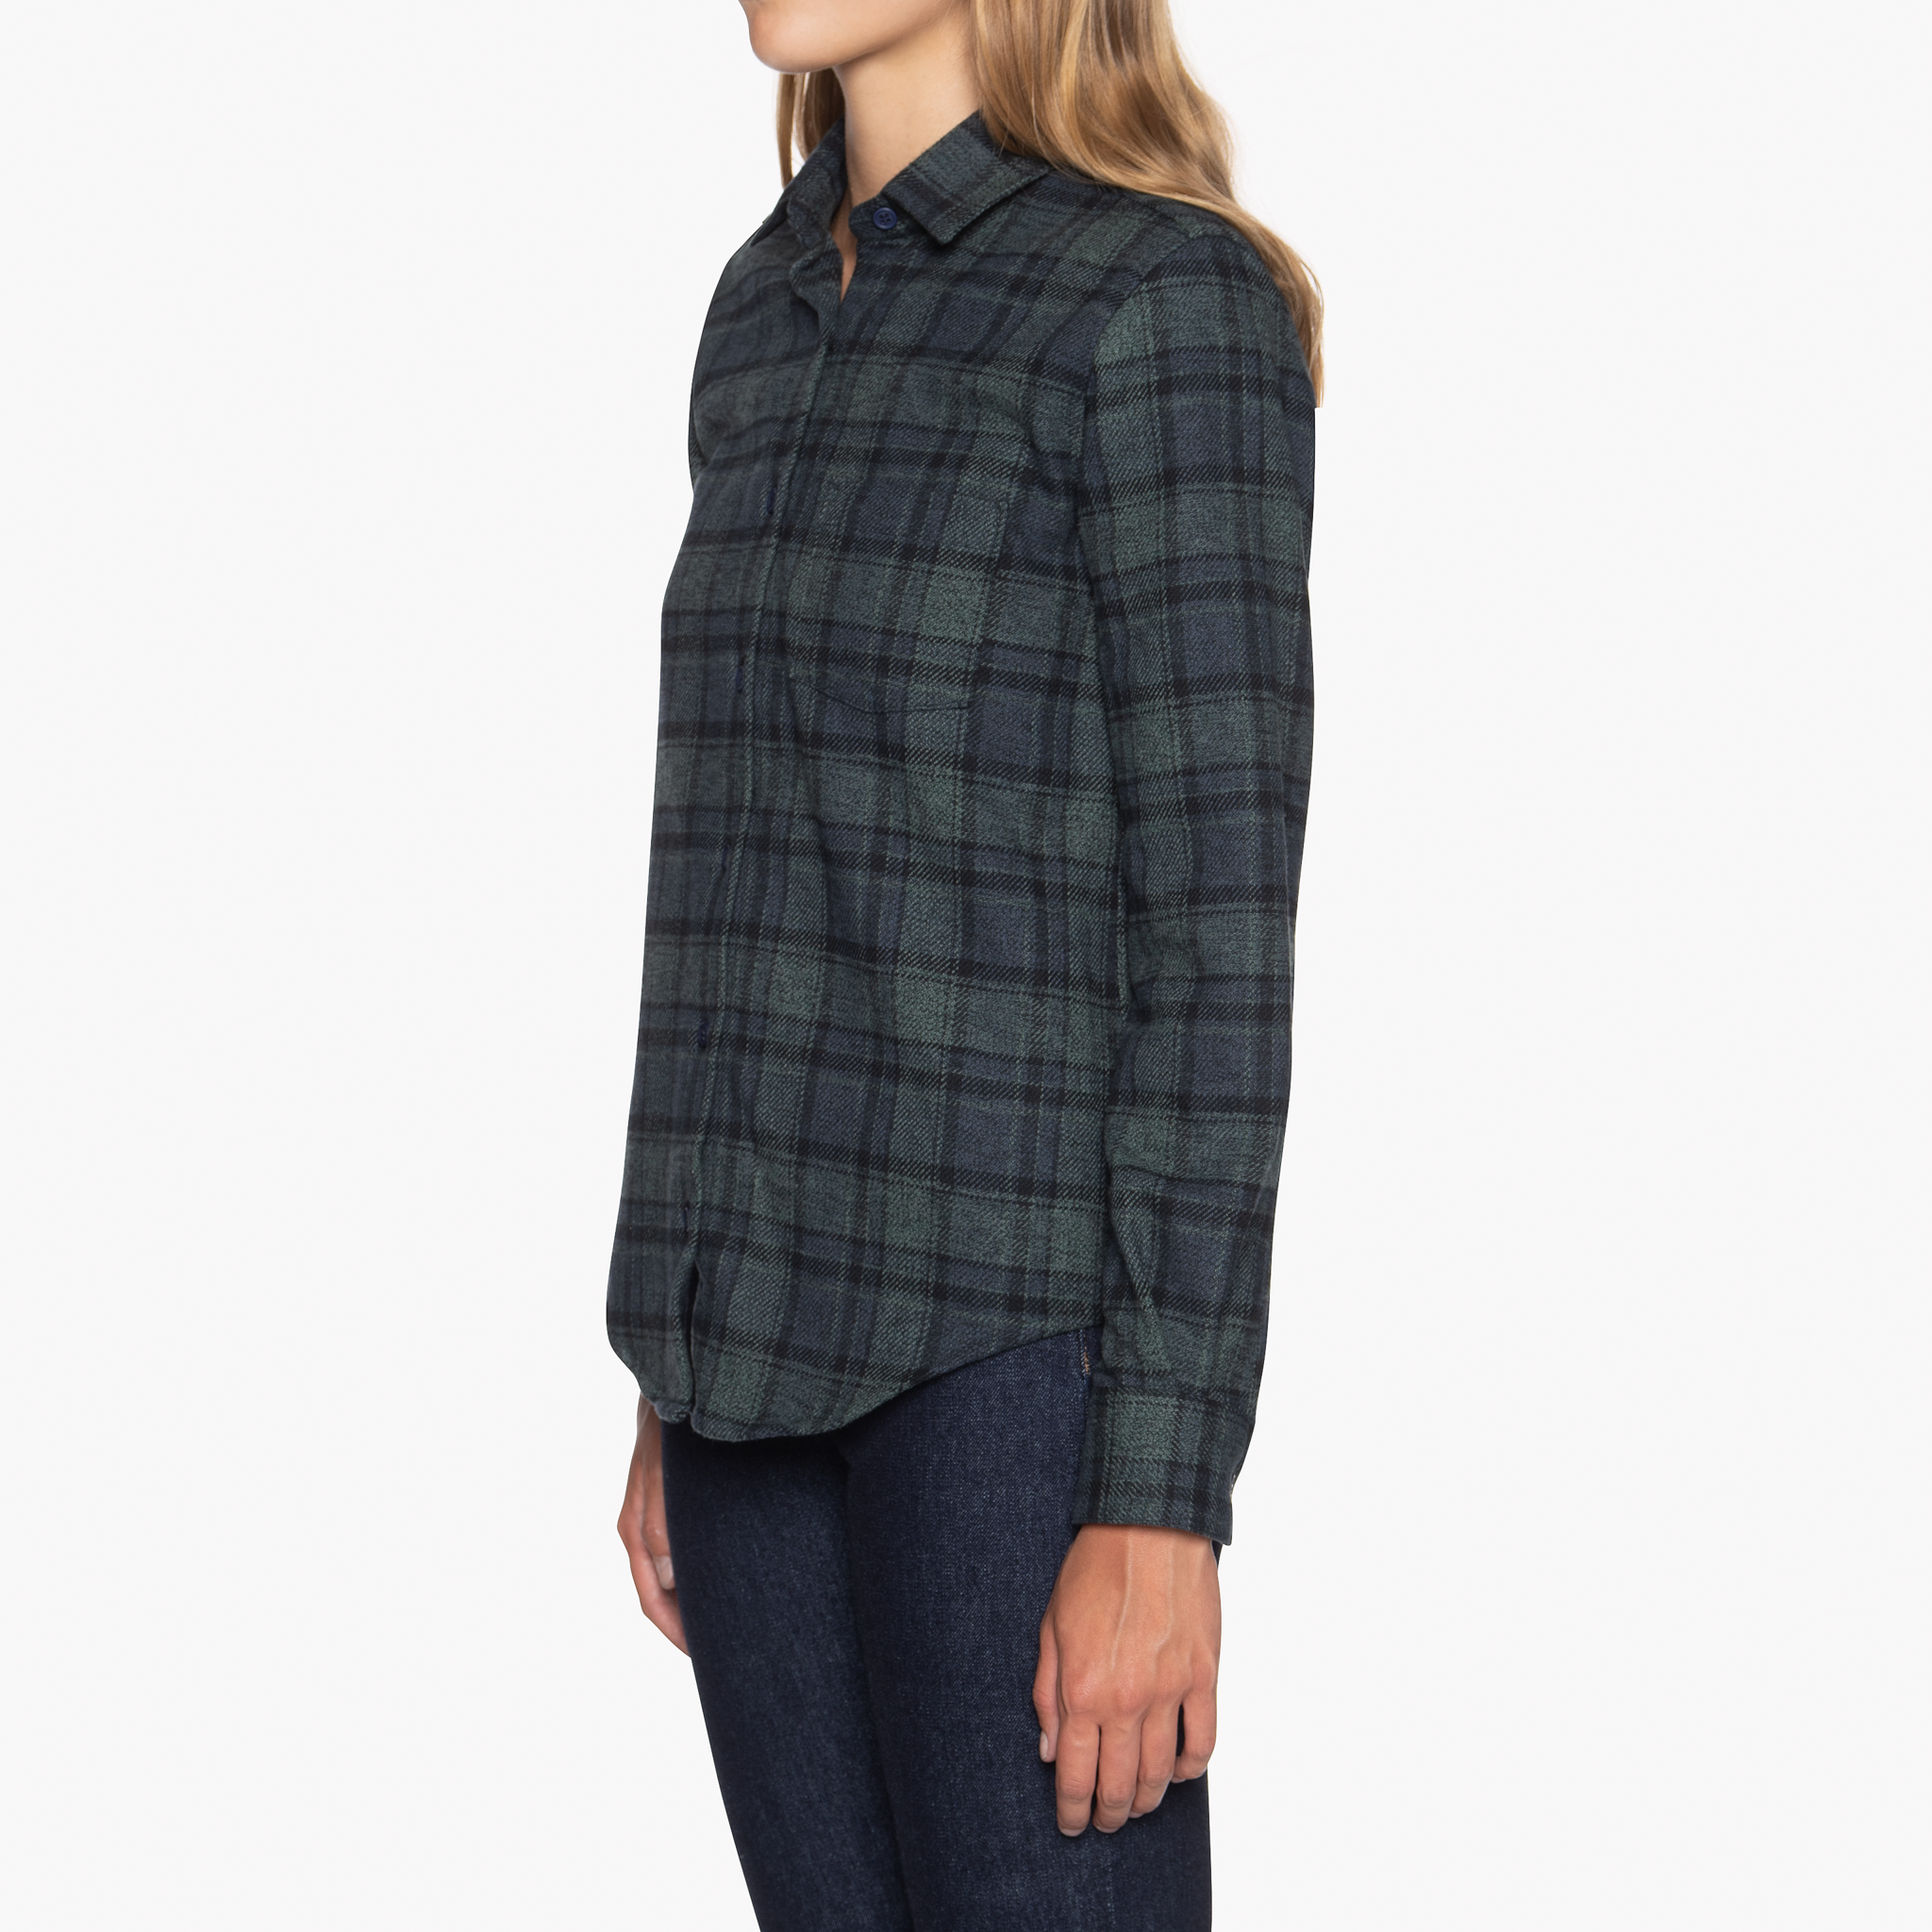  Women’s Country Shirt - Heavy Vintage Flannel - Blue/Green - Side 